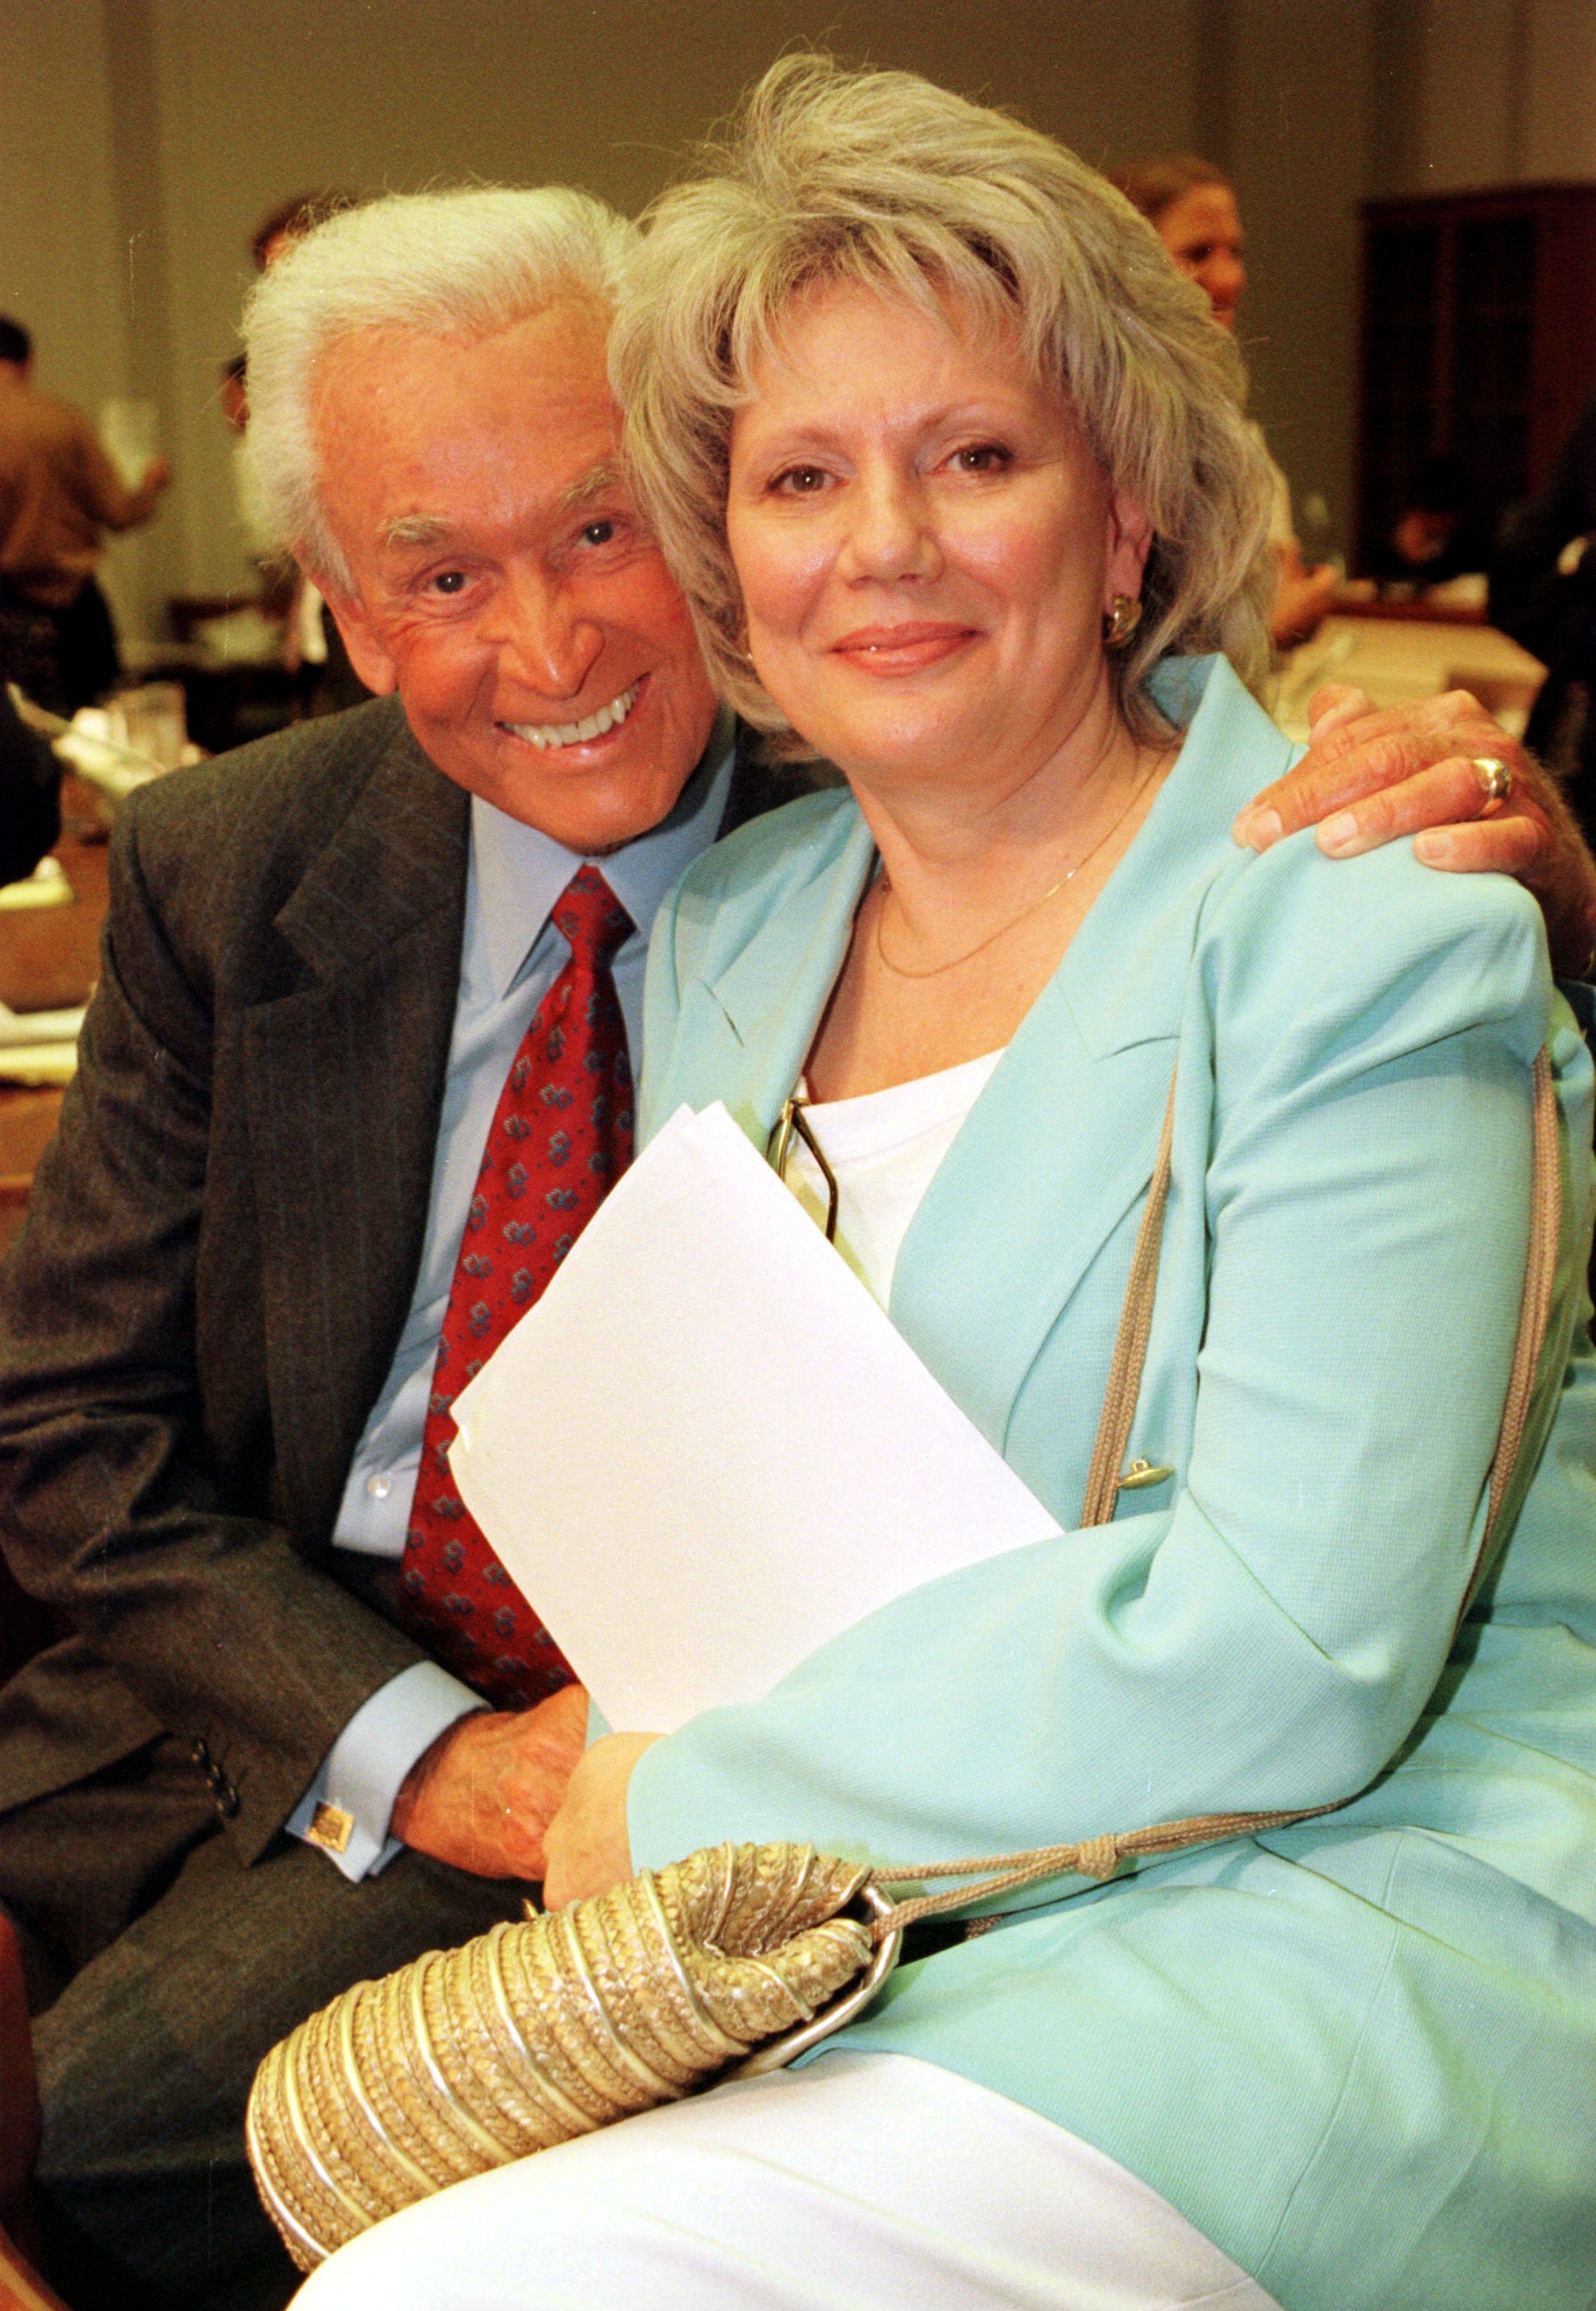 Bob Barker poses for photographers with Nancy Burnet, Director of United Activists for Animal Rights, after a hearing on the "Captive Elephant Accident Prevention Act of 1999" on June 13, 2000 at Capitol Hill in Washington, D.C. | Source: Getty Images